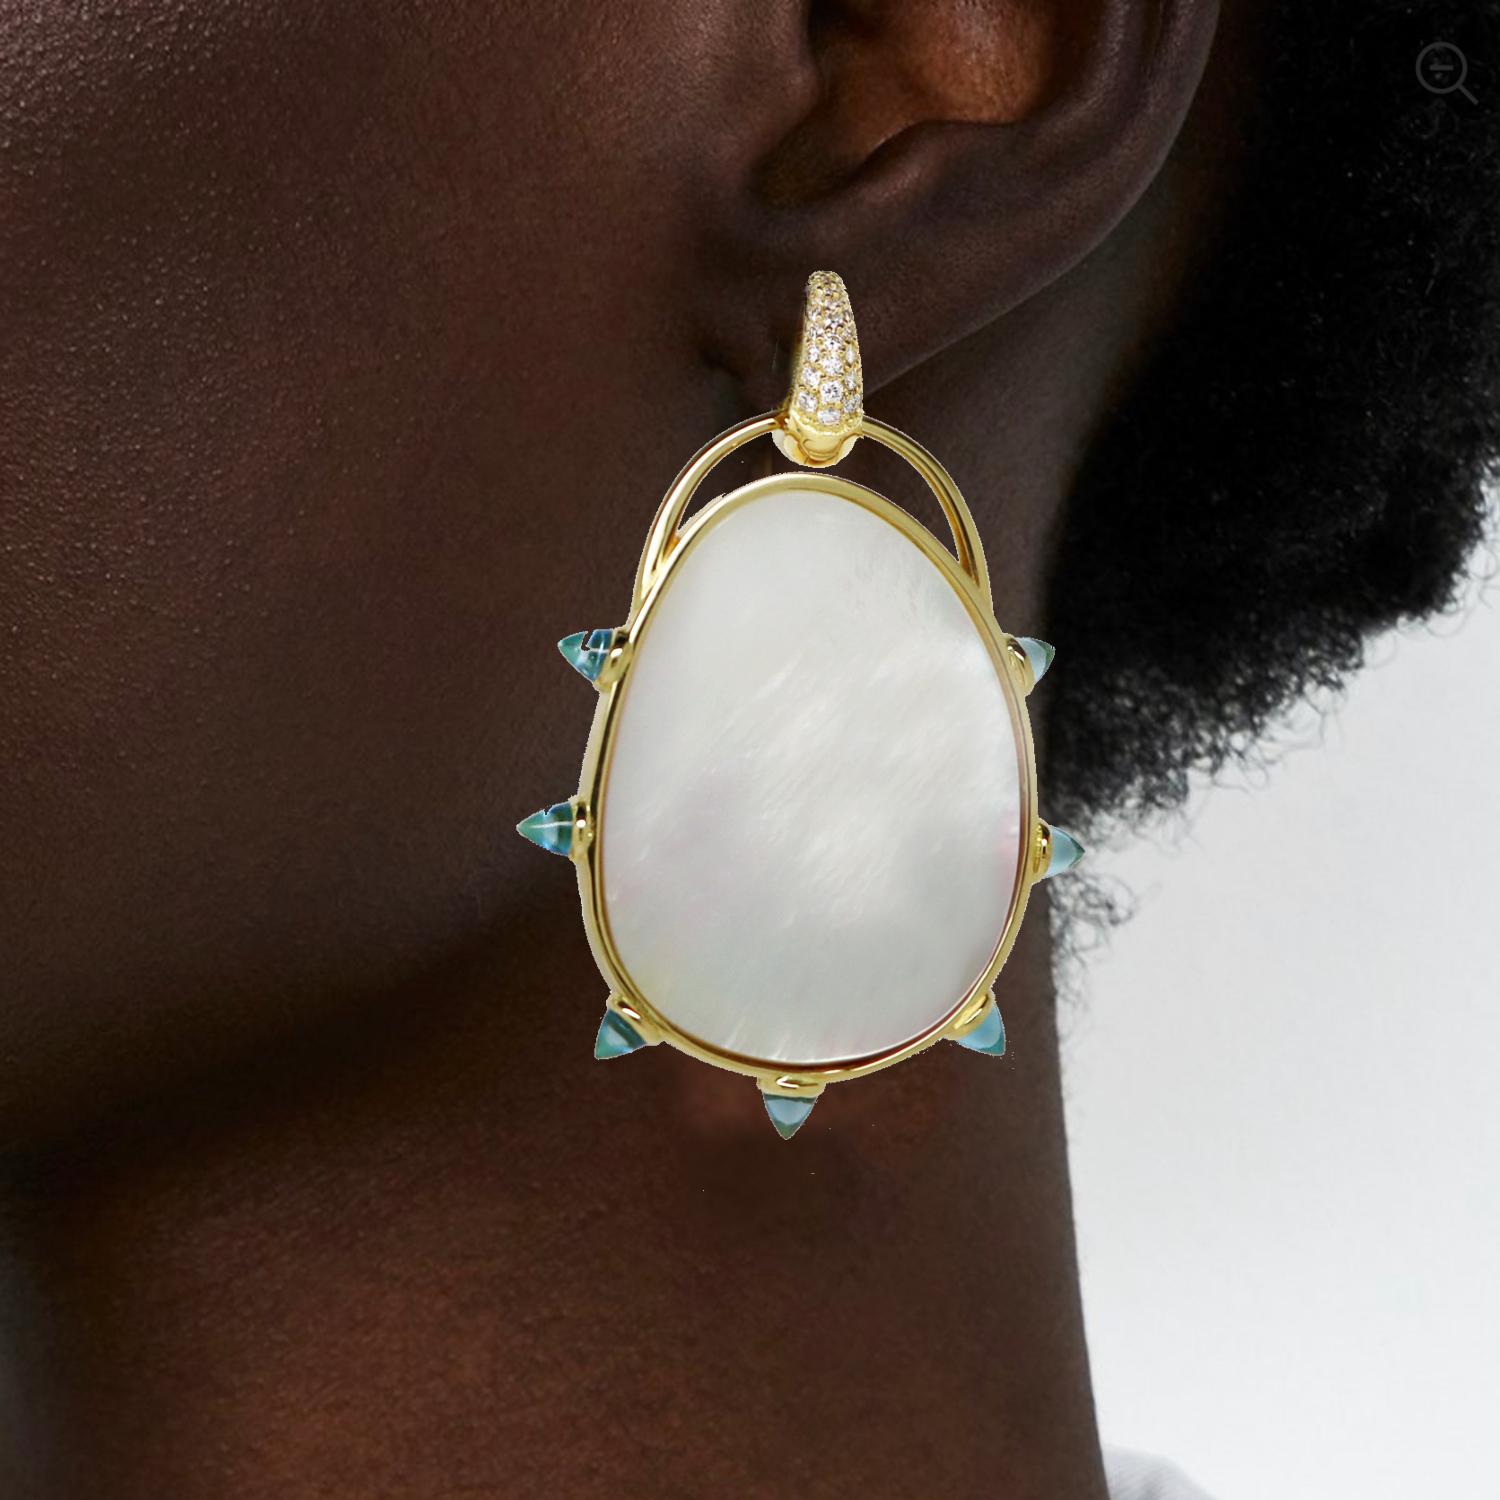 As seen in Wallpaper Magazine! Glamour is back...
These gorgeous natural Mother of Pearl drop earrings in 18k yellow gold button and reverse diamond smooth cut natural blue topaz, are new to our Collection this year and are truly unique. There are